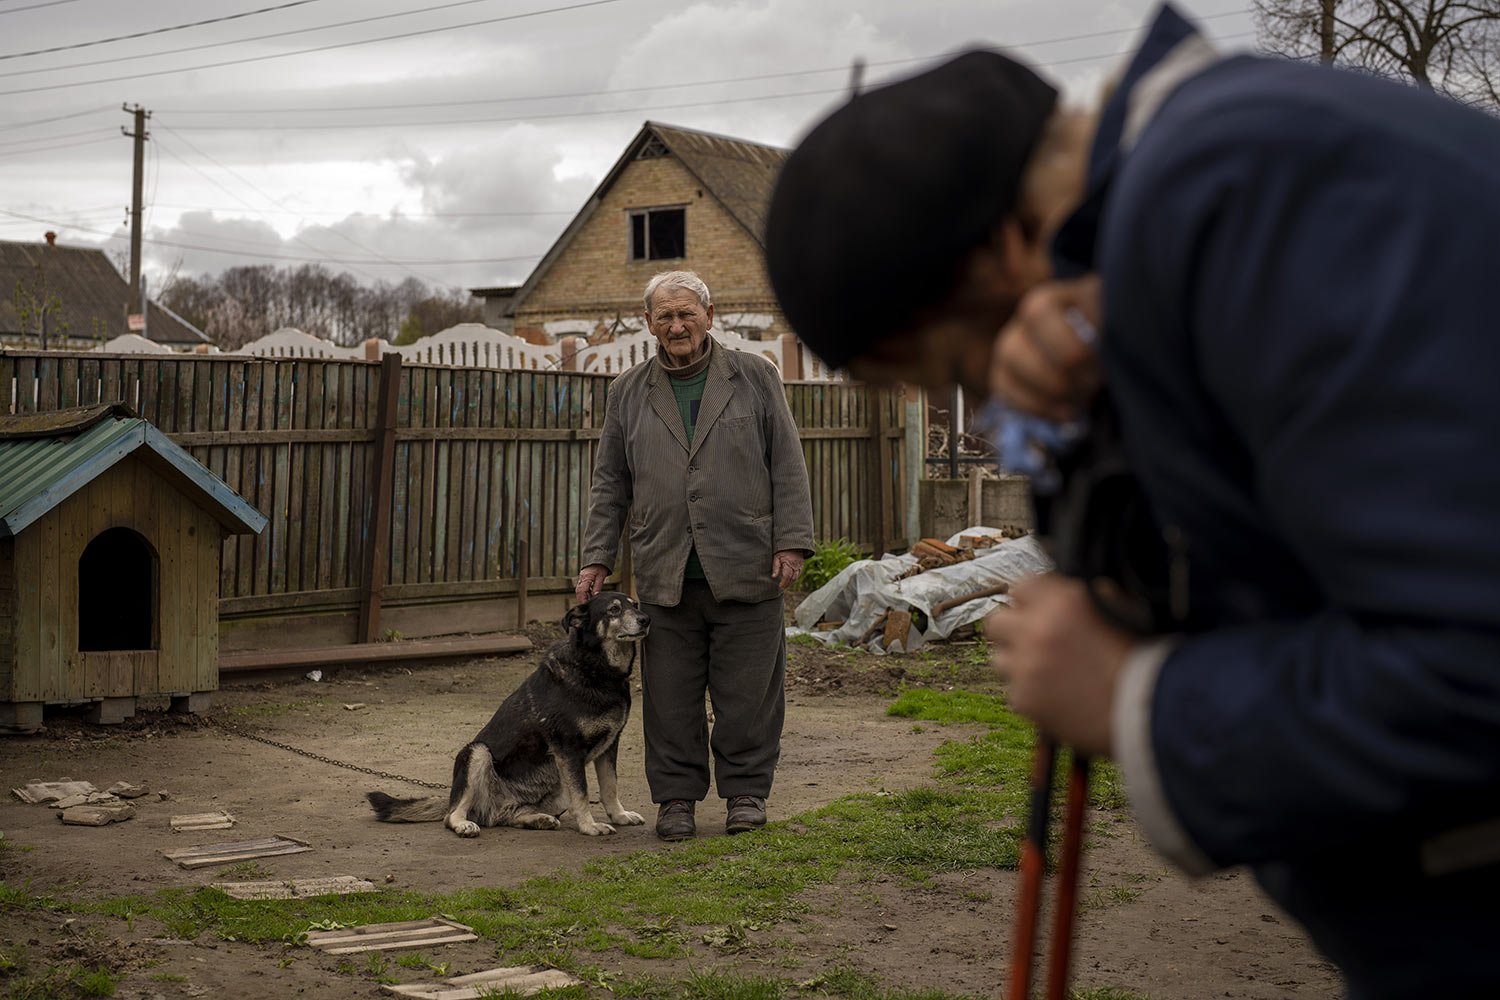  Petro Volin'ko, 87, attends the funeral of his neighbour Mykola Moroz, 47, at his home in Ozera village, near Bucha, Ukrain, Tuesday, April 26, 2022. Mykola was captured by Russian soldiers from his home in Ozera on March 13 and taken for several we